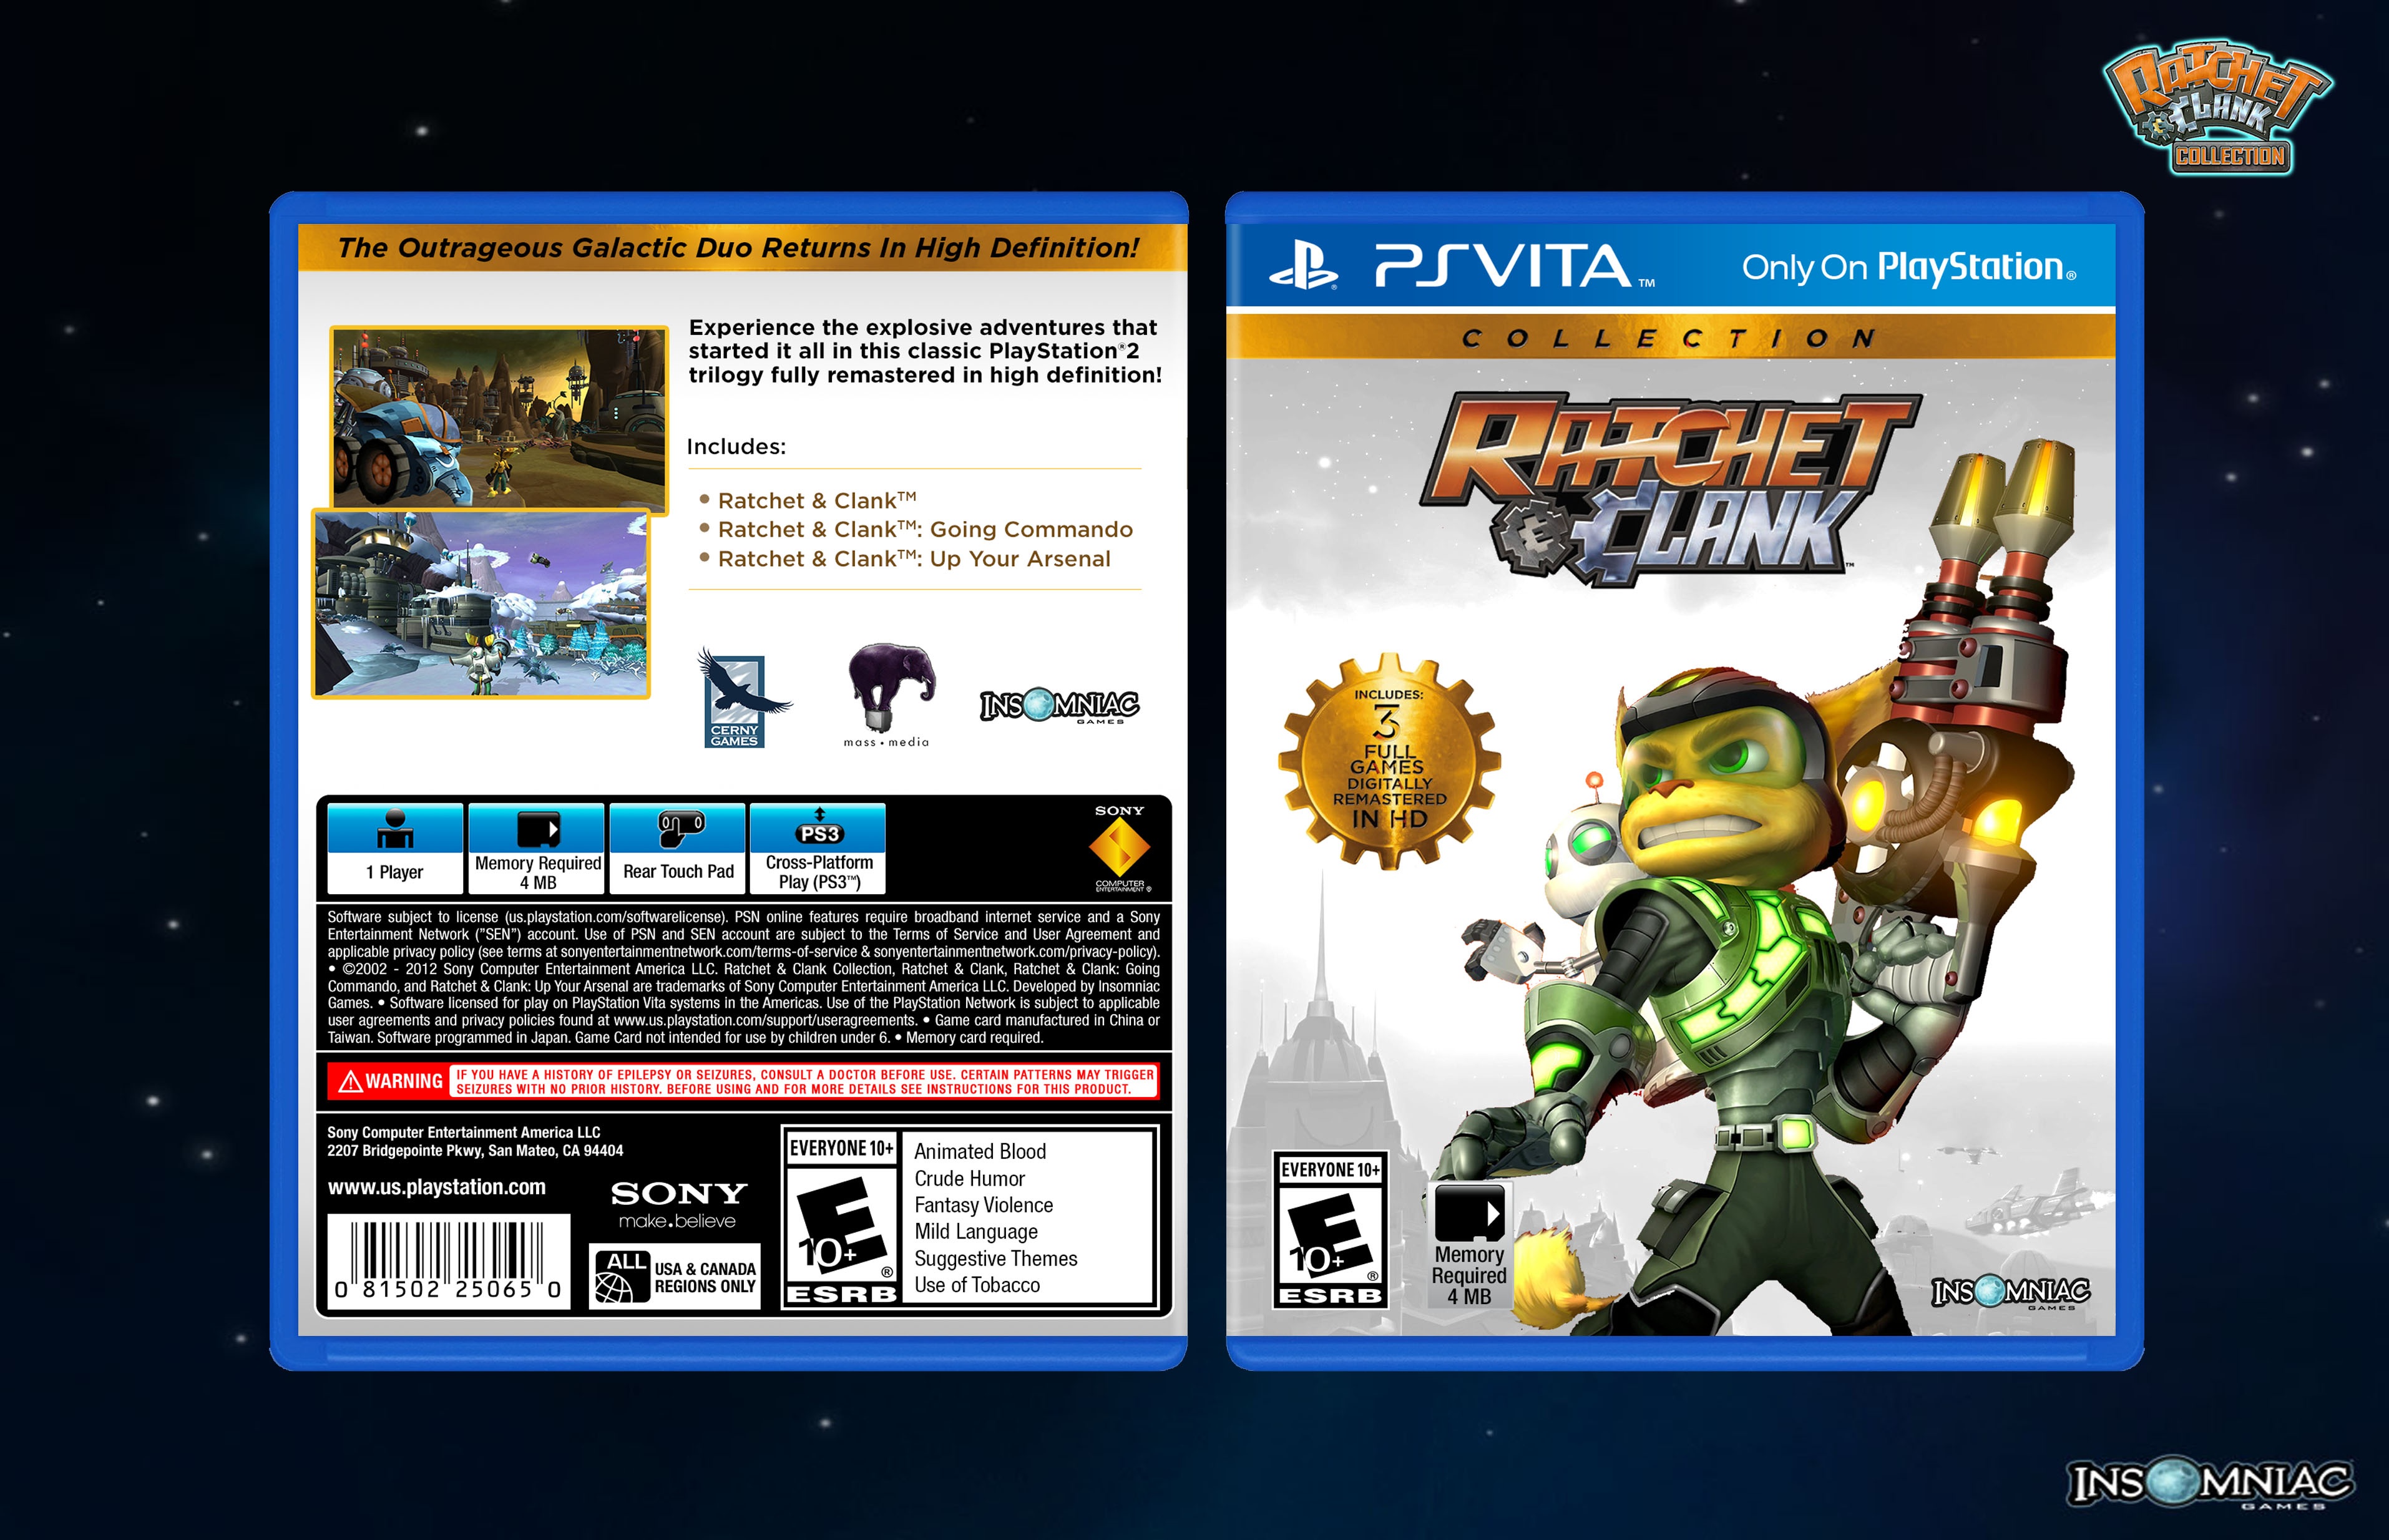 Ratchet & Clank Collection box cover